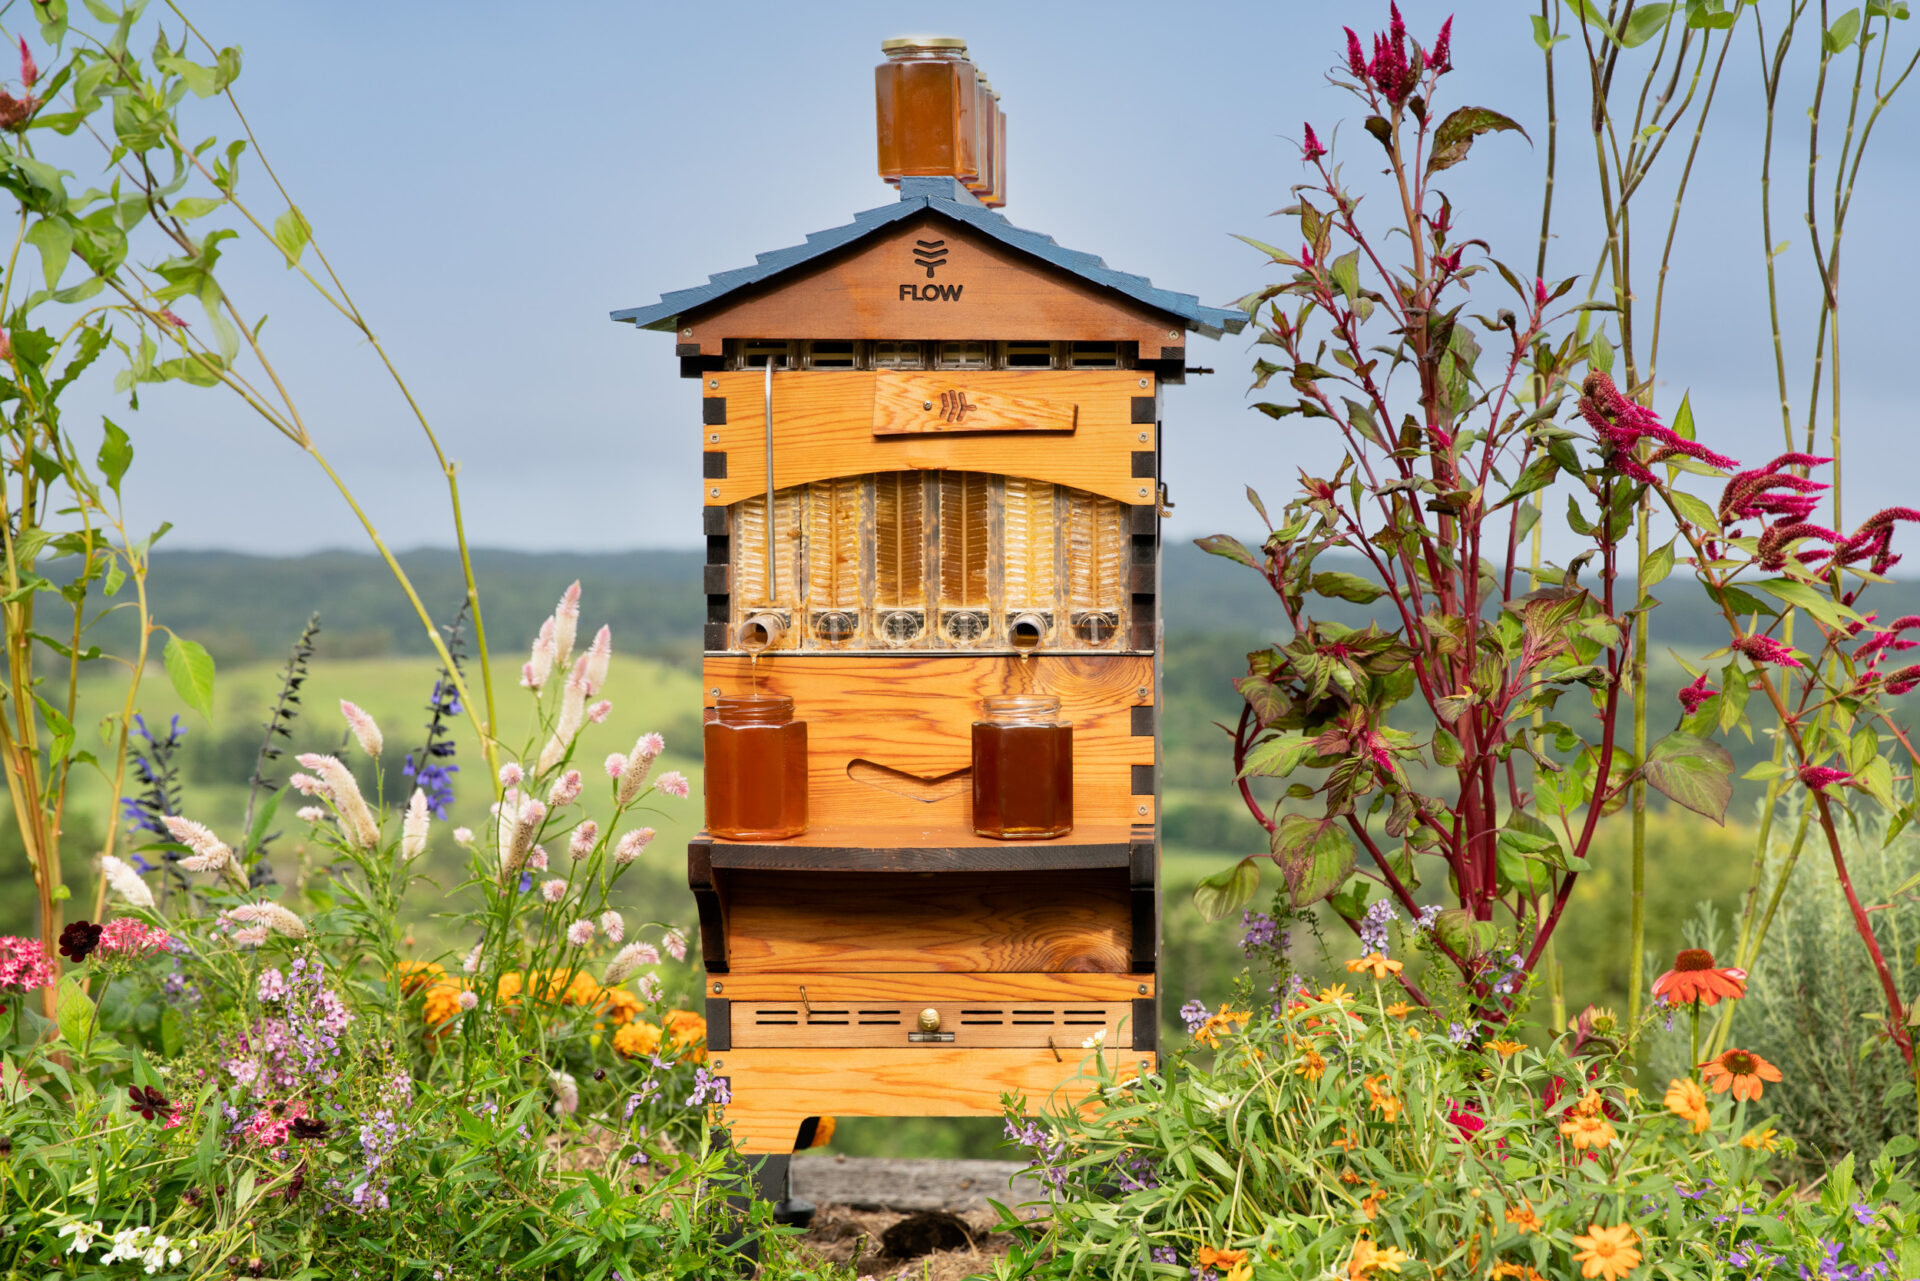 A bee hive sits in a field full of flowers and green vegetation.